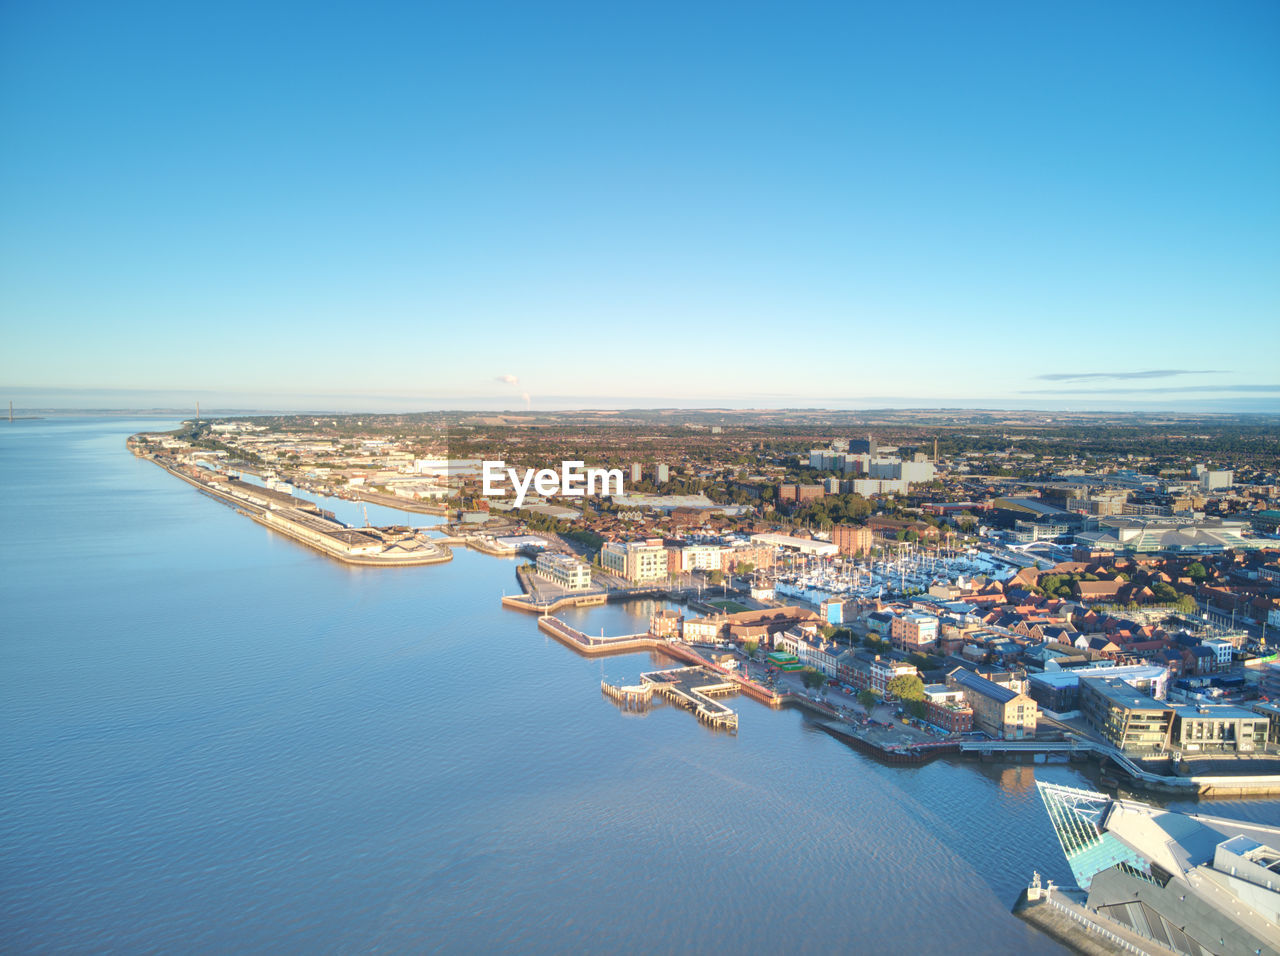 Drone aerial photo of kingston-upon-hull, uk